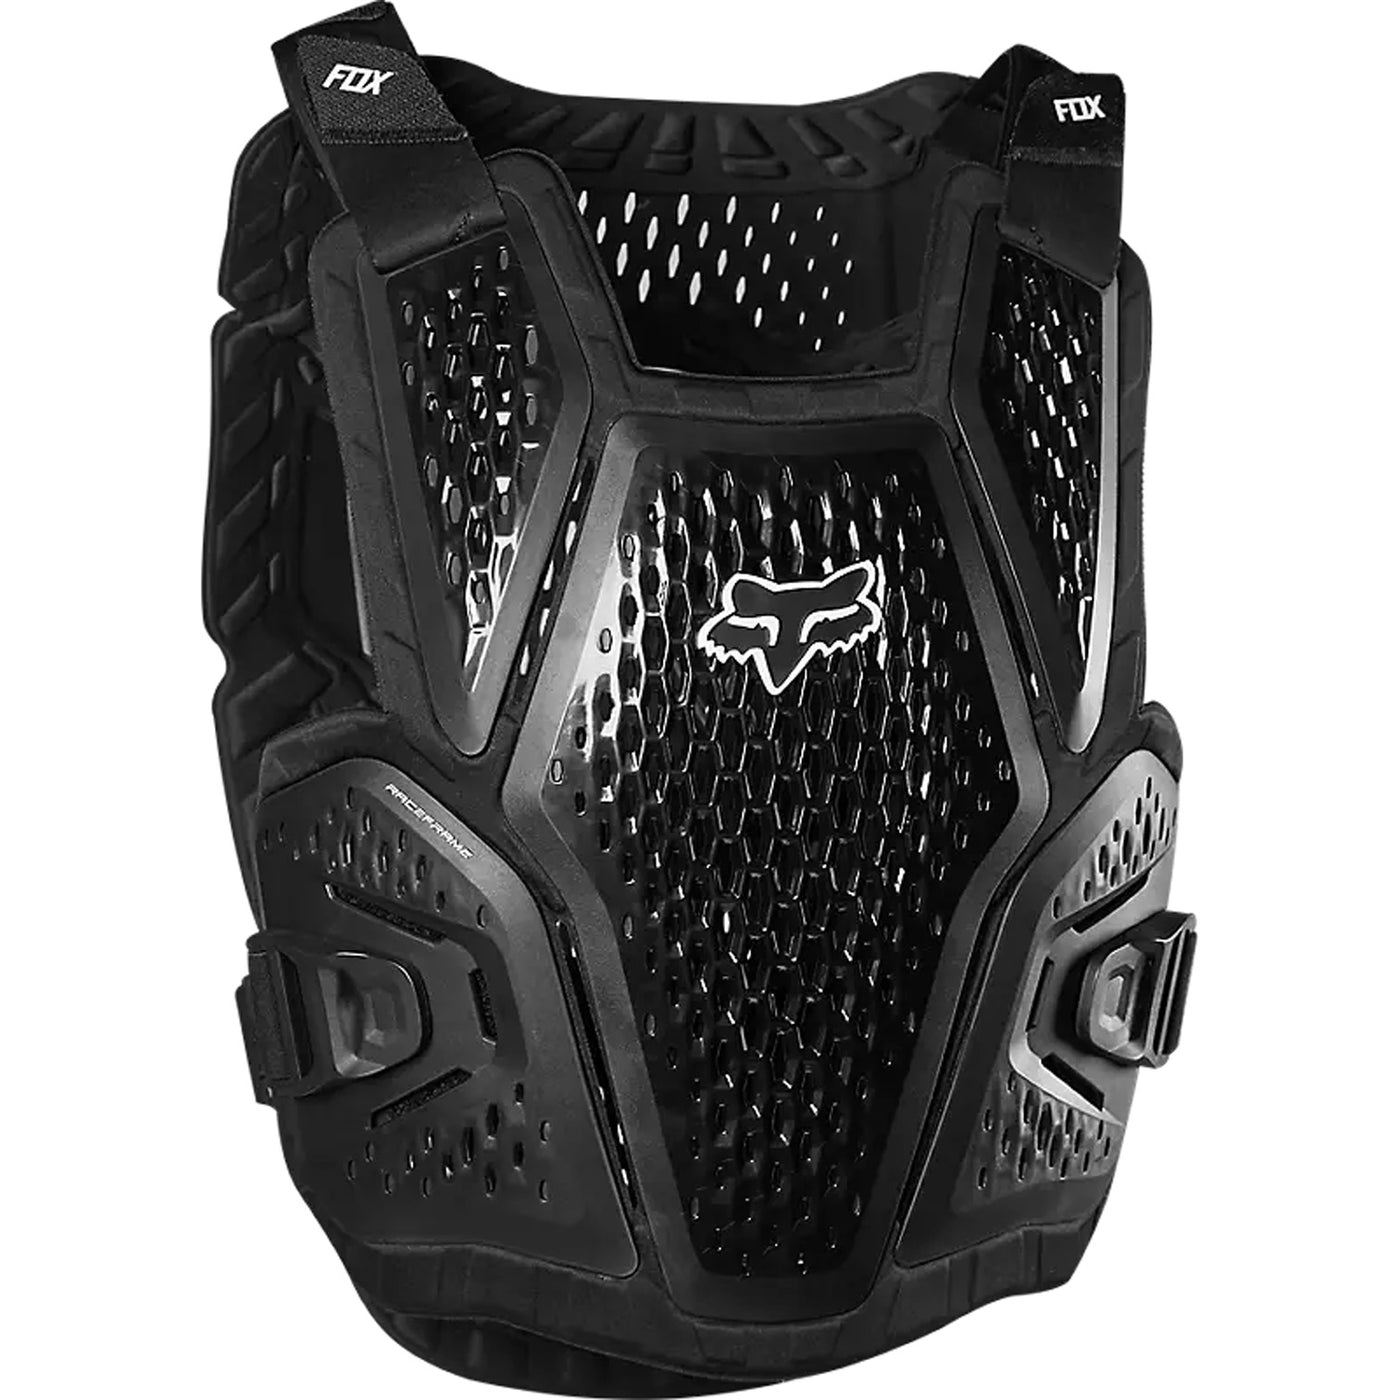 Fox Racing Youth Raceframe Roost Guard